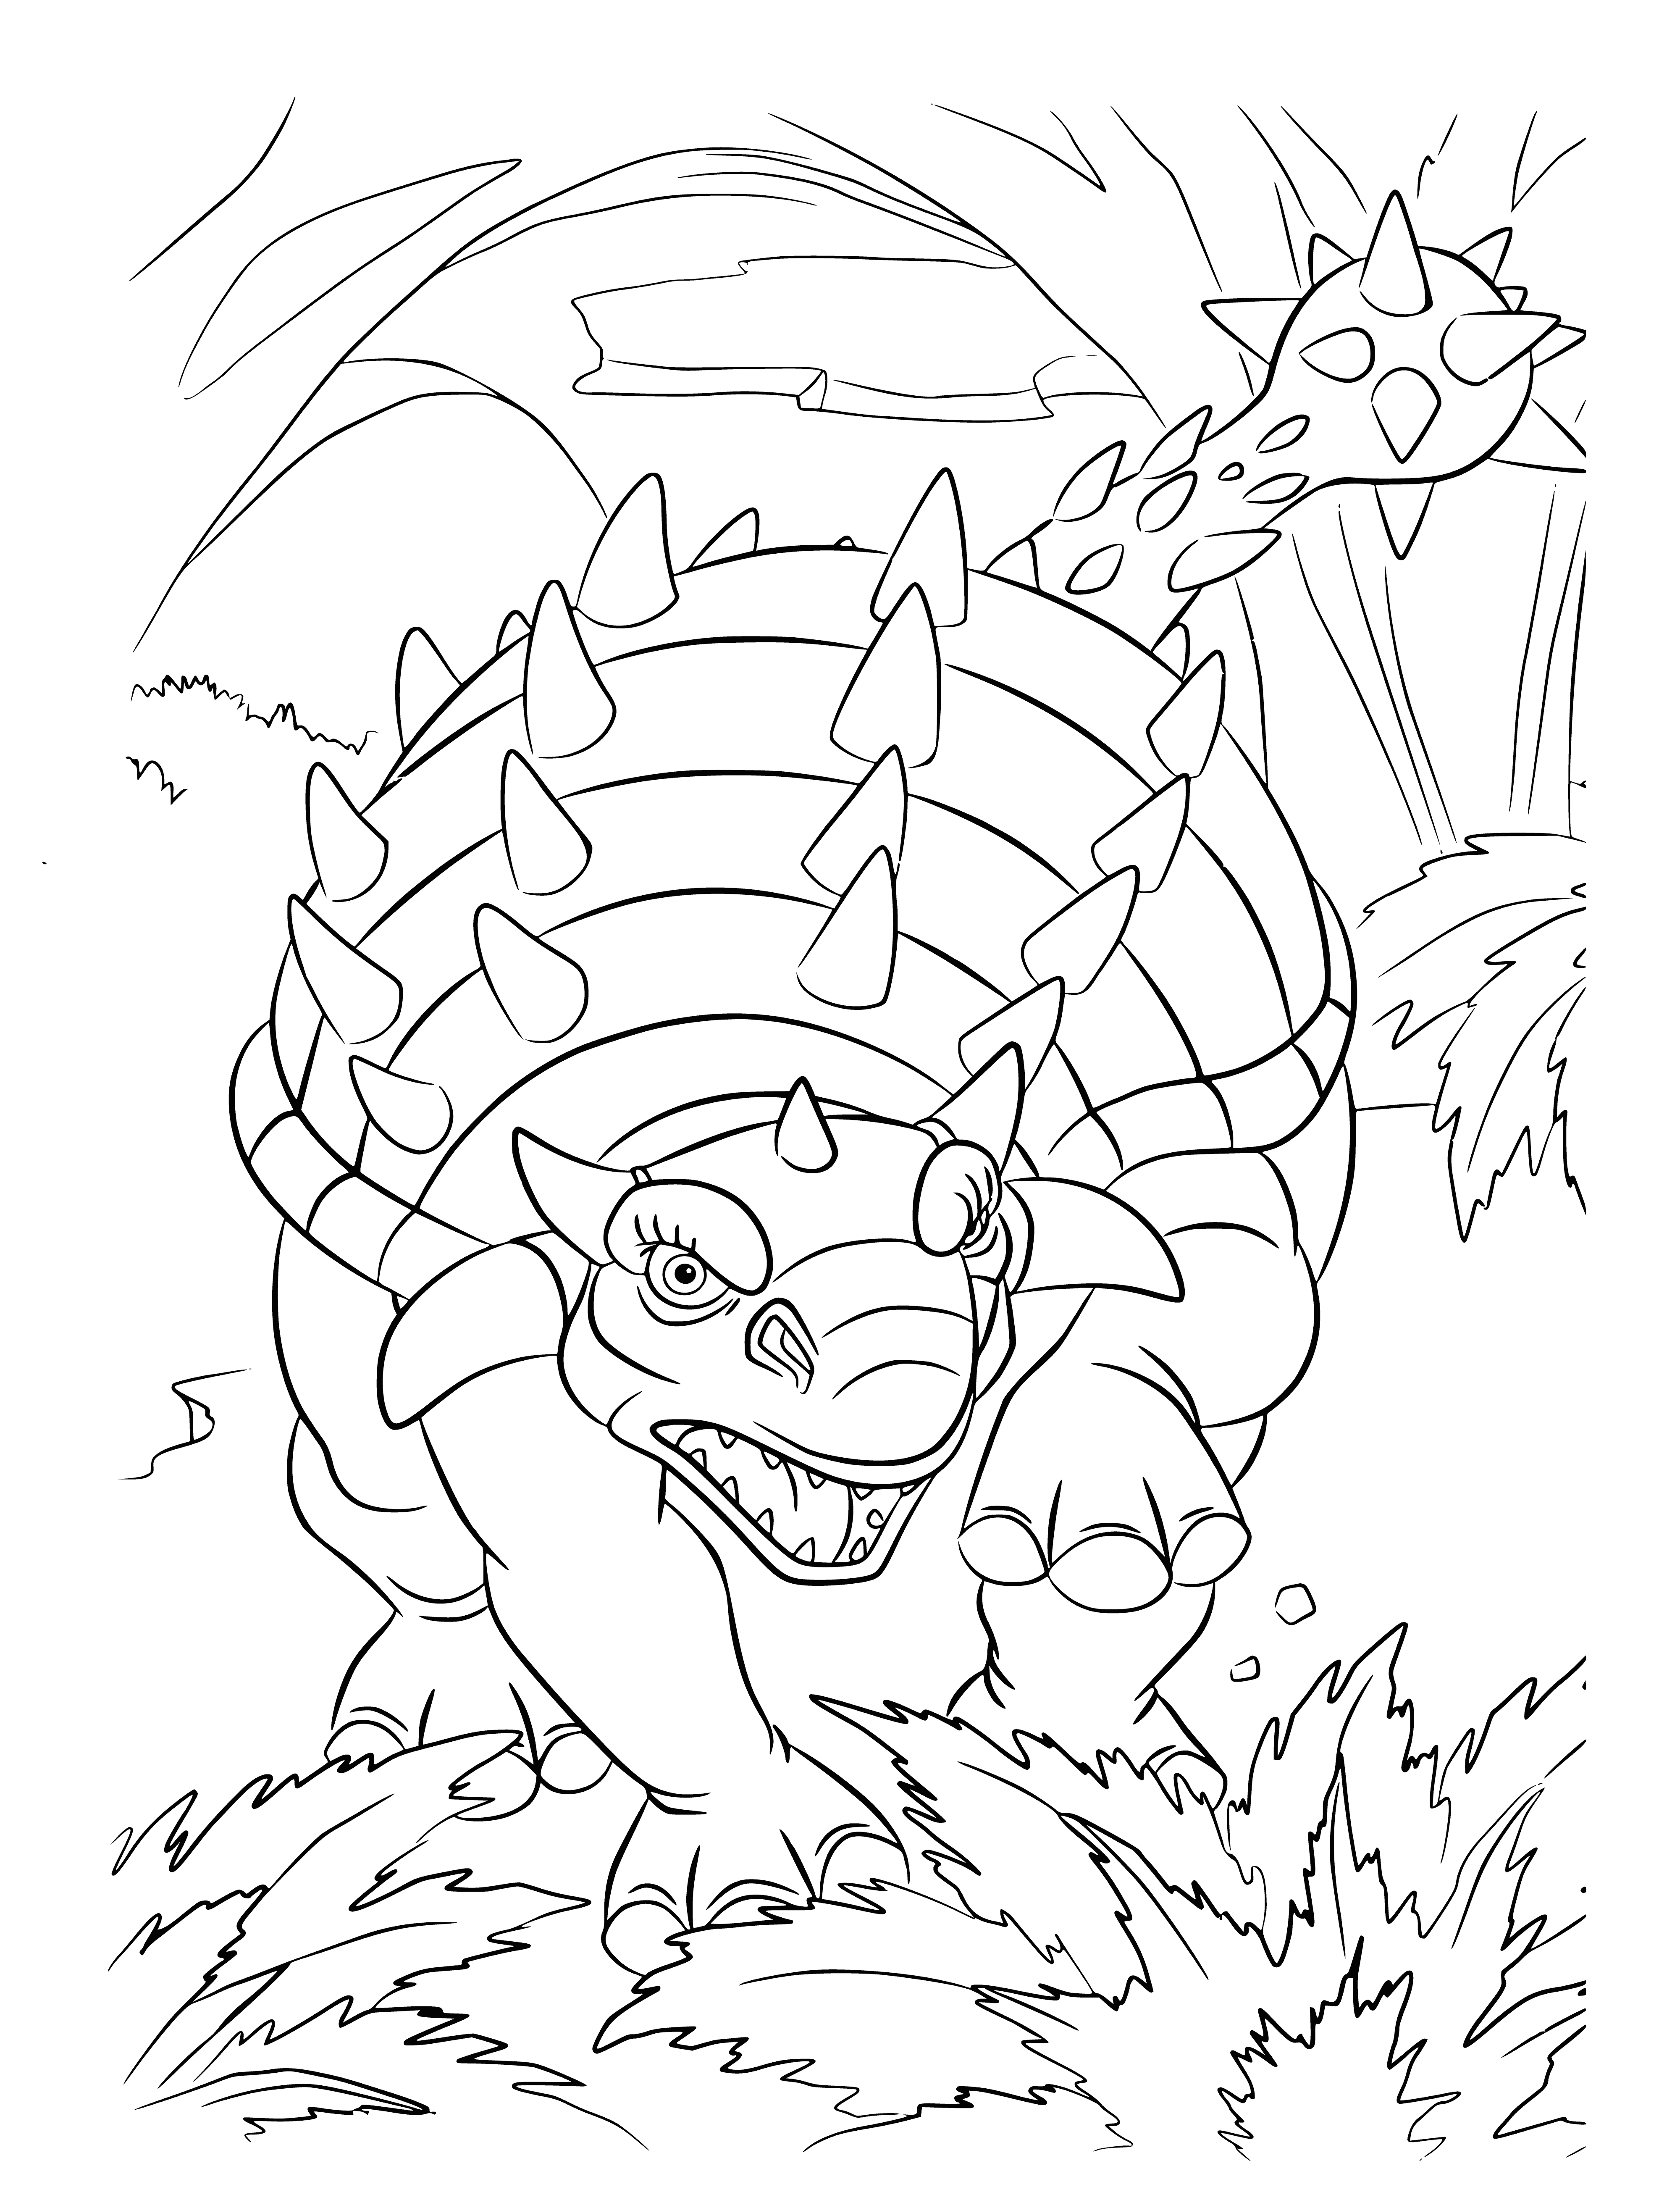 coloring page: Epic battle w/ evil-looking dino at center; "dead" dinos around him & fiery light - looks like he has won & defeated whatever he faces.